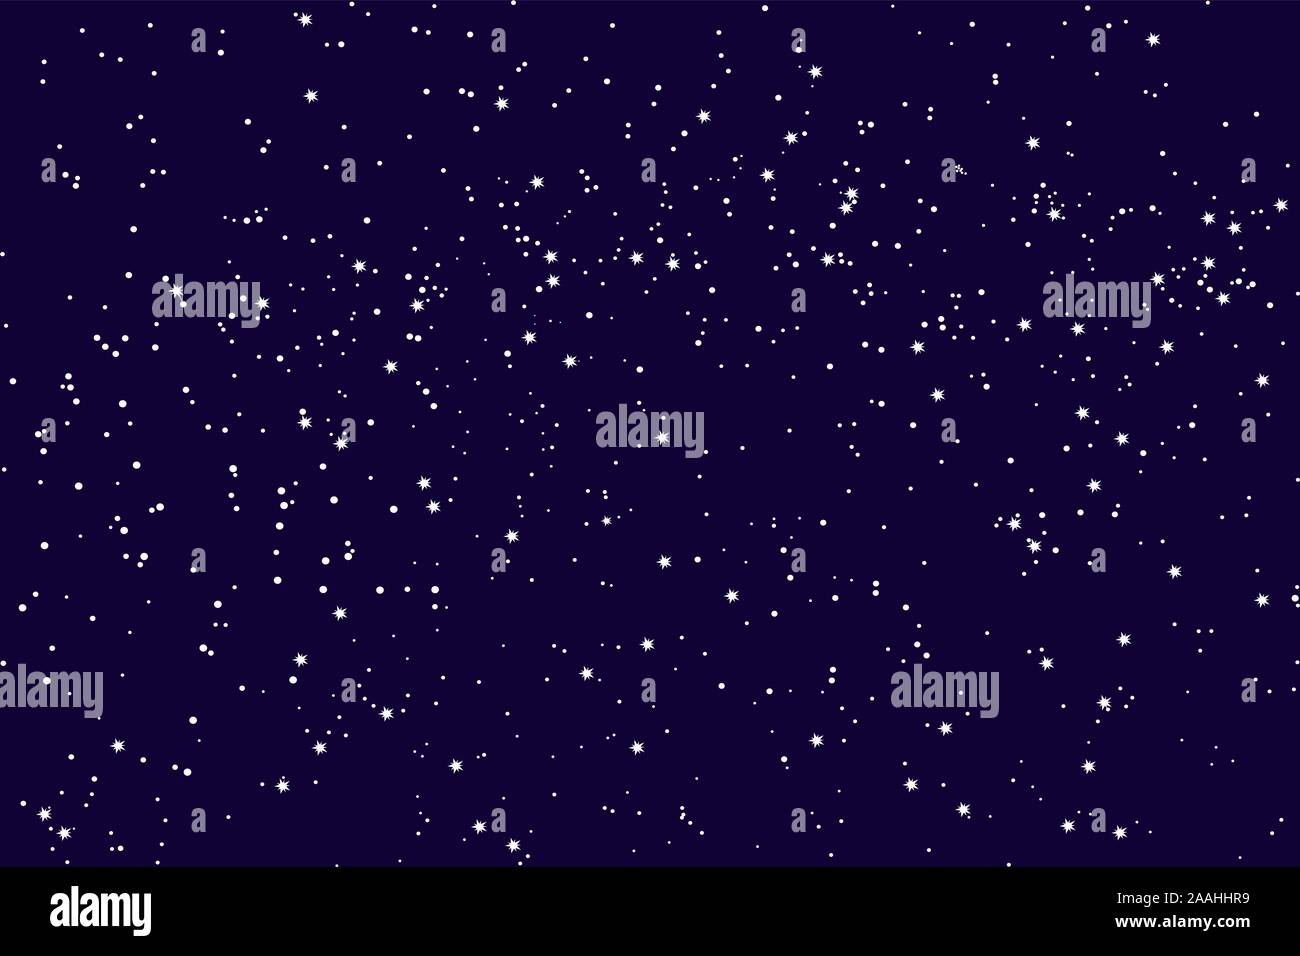 Beautiful Starry sky, abstract background. Stars and constellations on dark blue background. Stock Vector